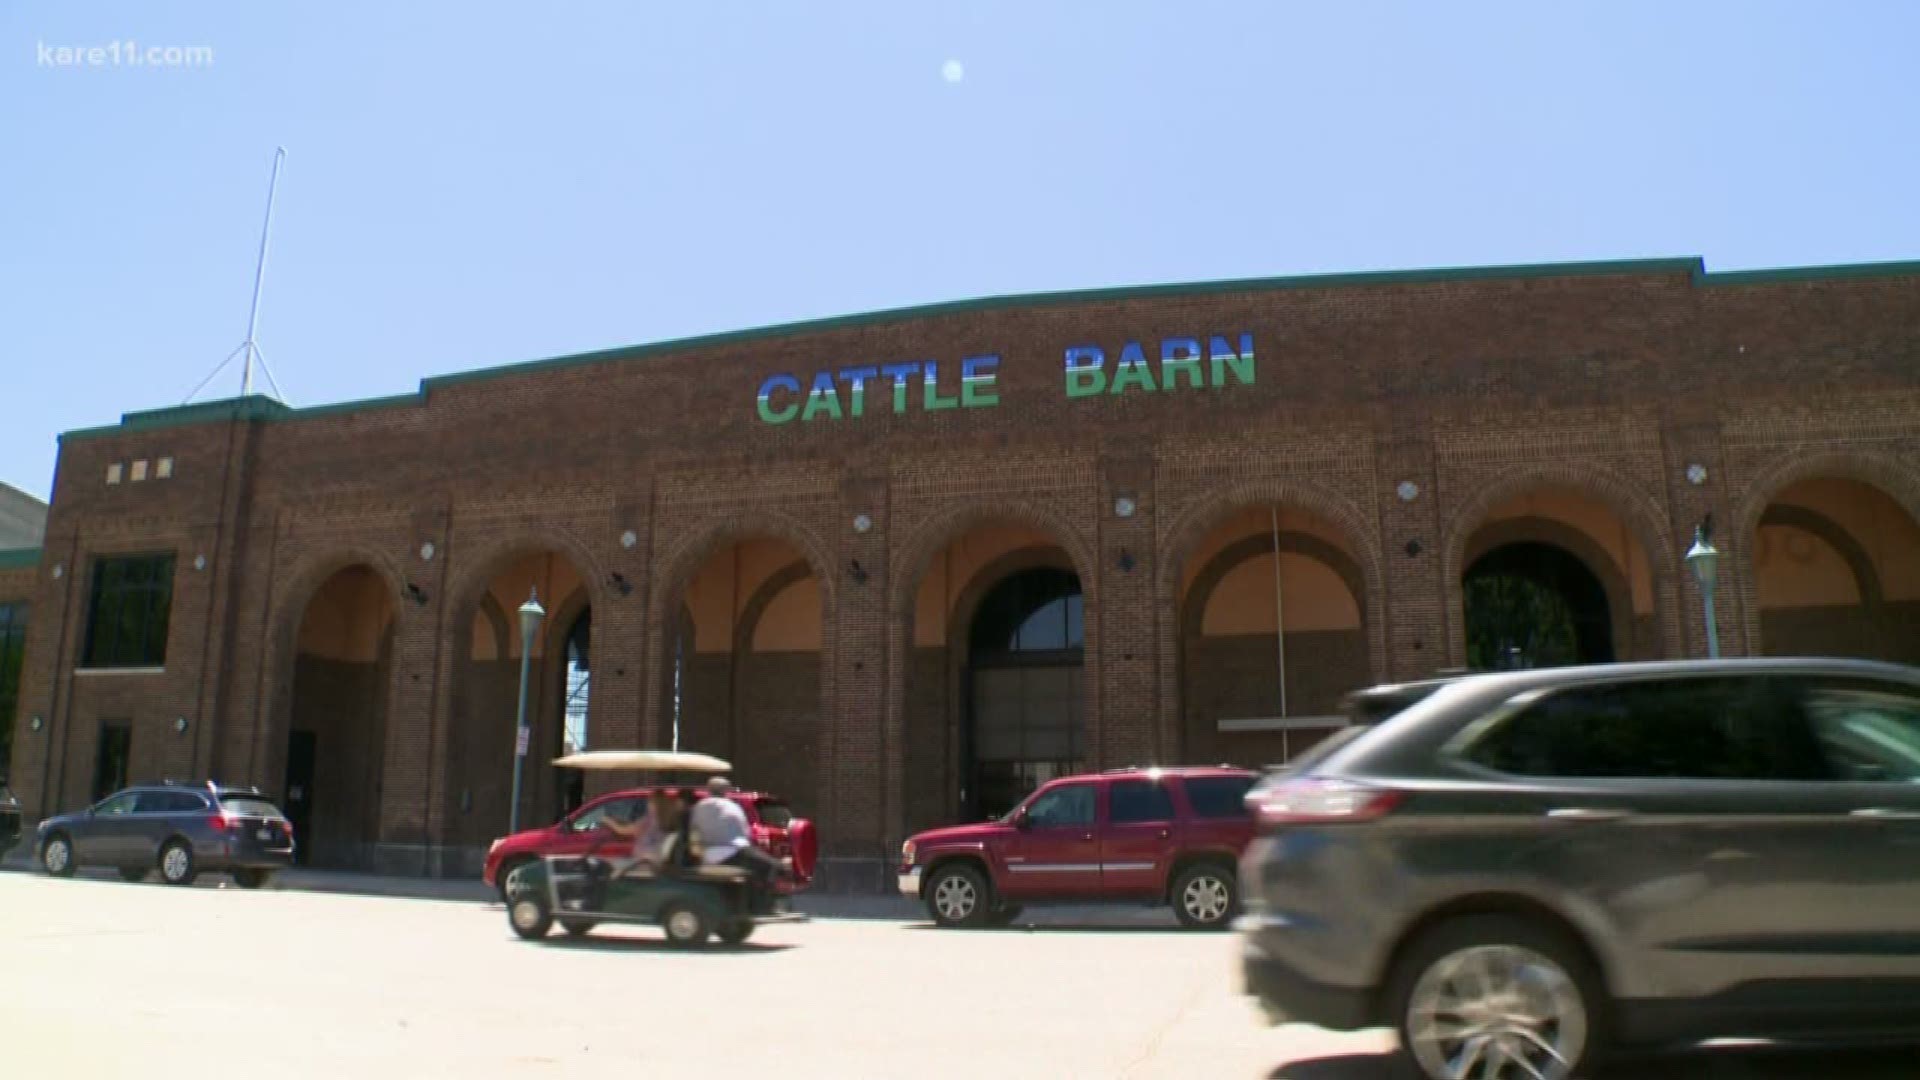 Crews are busy getting the Cattle Barn repaired before the Minnesota State Fair.